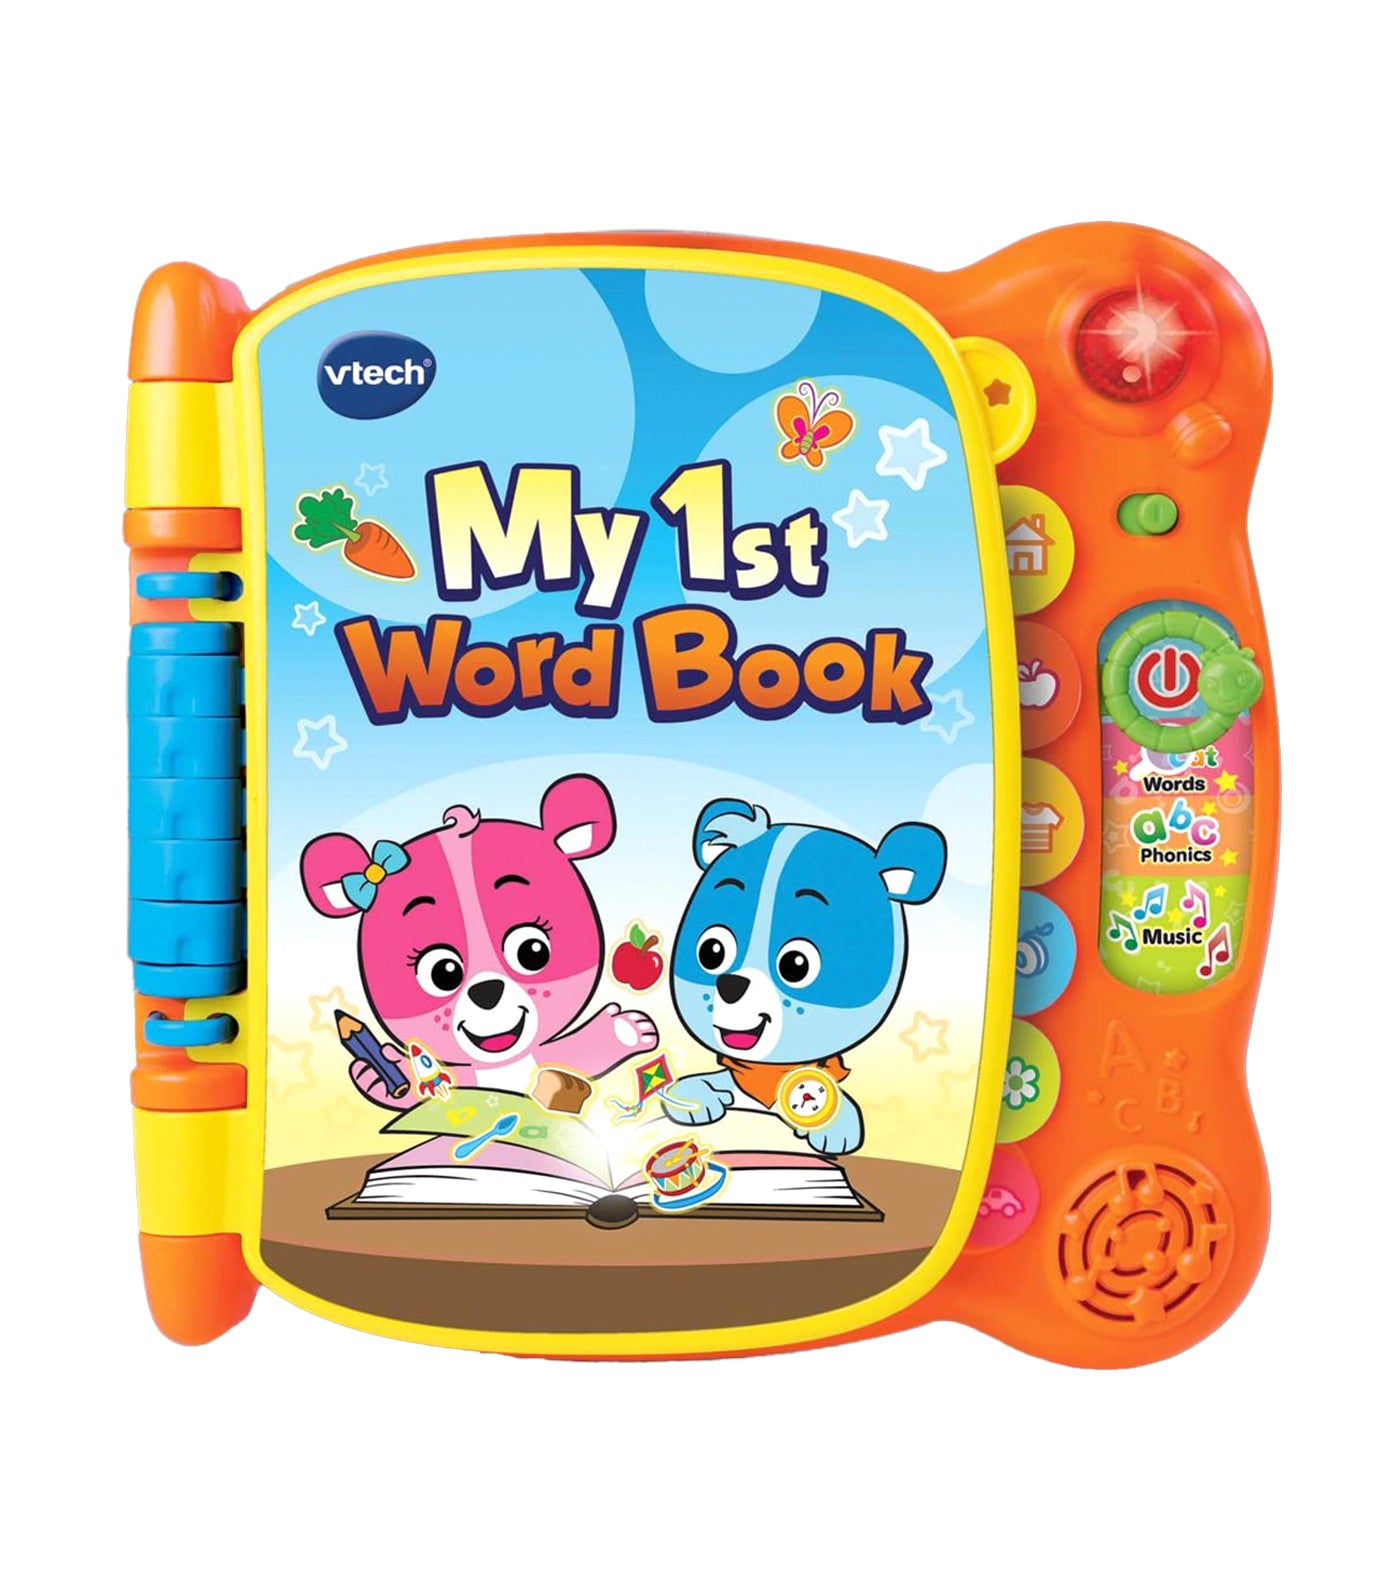 vtech touch and teach word book